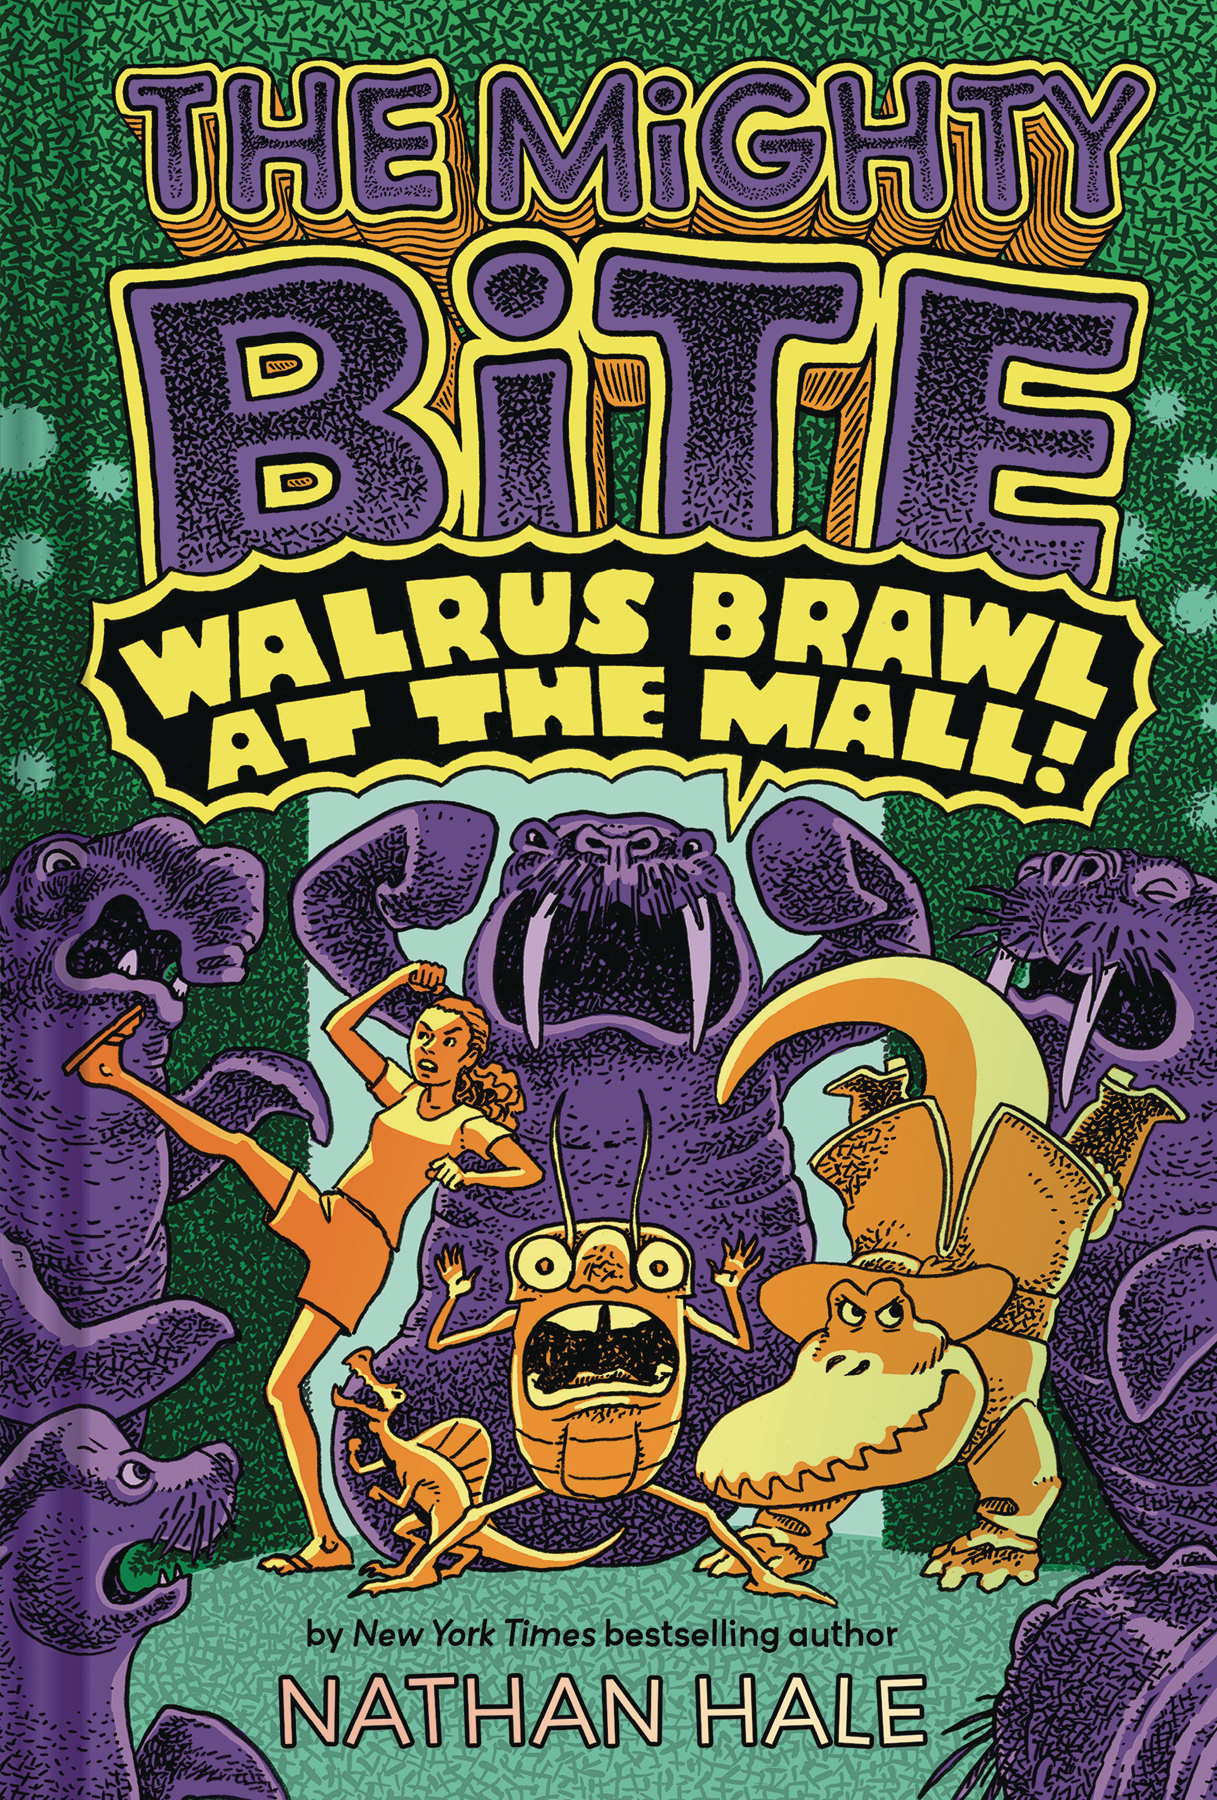 Mighty Bite Graphic Novel Volume 2 Walrus Brawl At The Mall